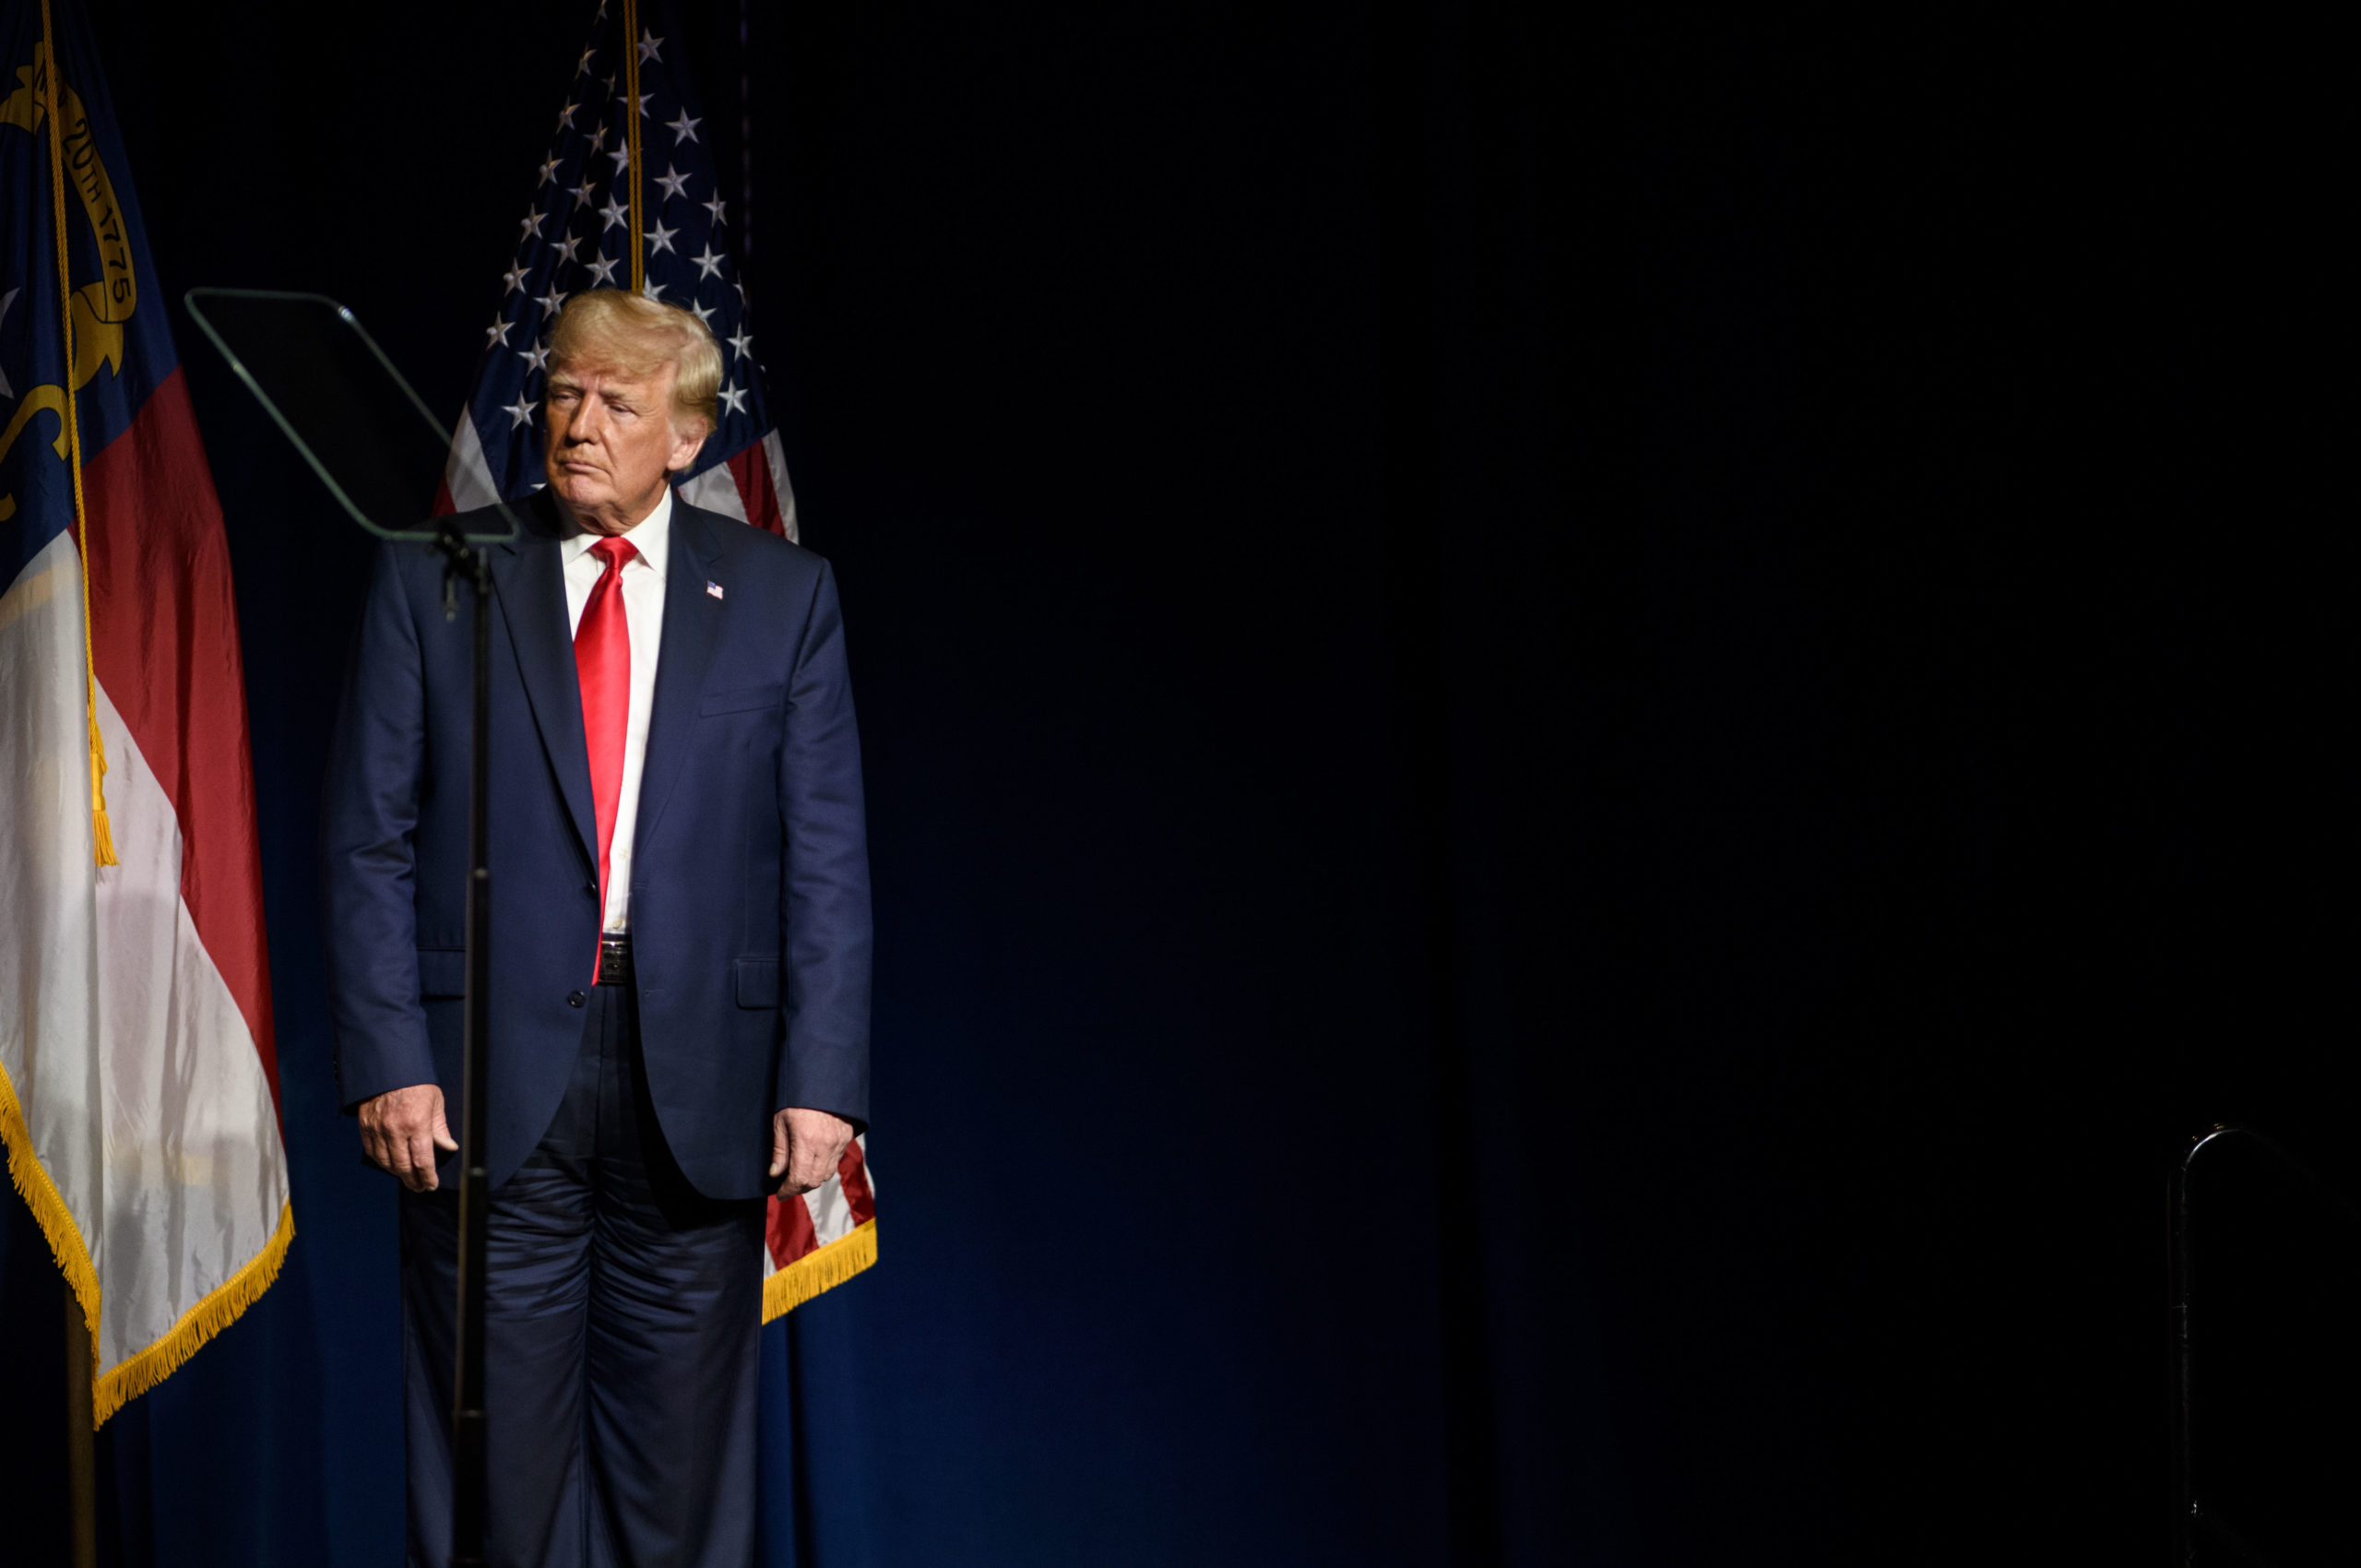 GREENVILLE, NC - JUNE 05: Former U.S. President Donald Trump listens to Laura Trump tell the crowd she has decided not to run for the N.C. Senate at the NCGOP state convention on June 5, 2021 in Greenville, North Carolina. The event is one of former U.S. President Donald Trumps first high-profile public appearances since leaving the White House in January. (Photo by Melissa Sue Gerrits/Getty Images)